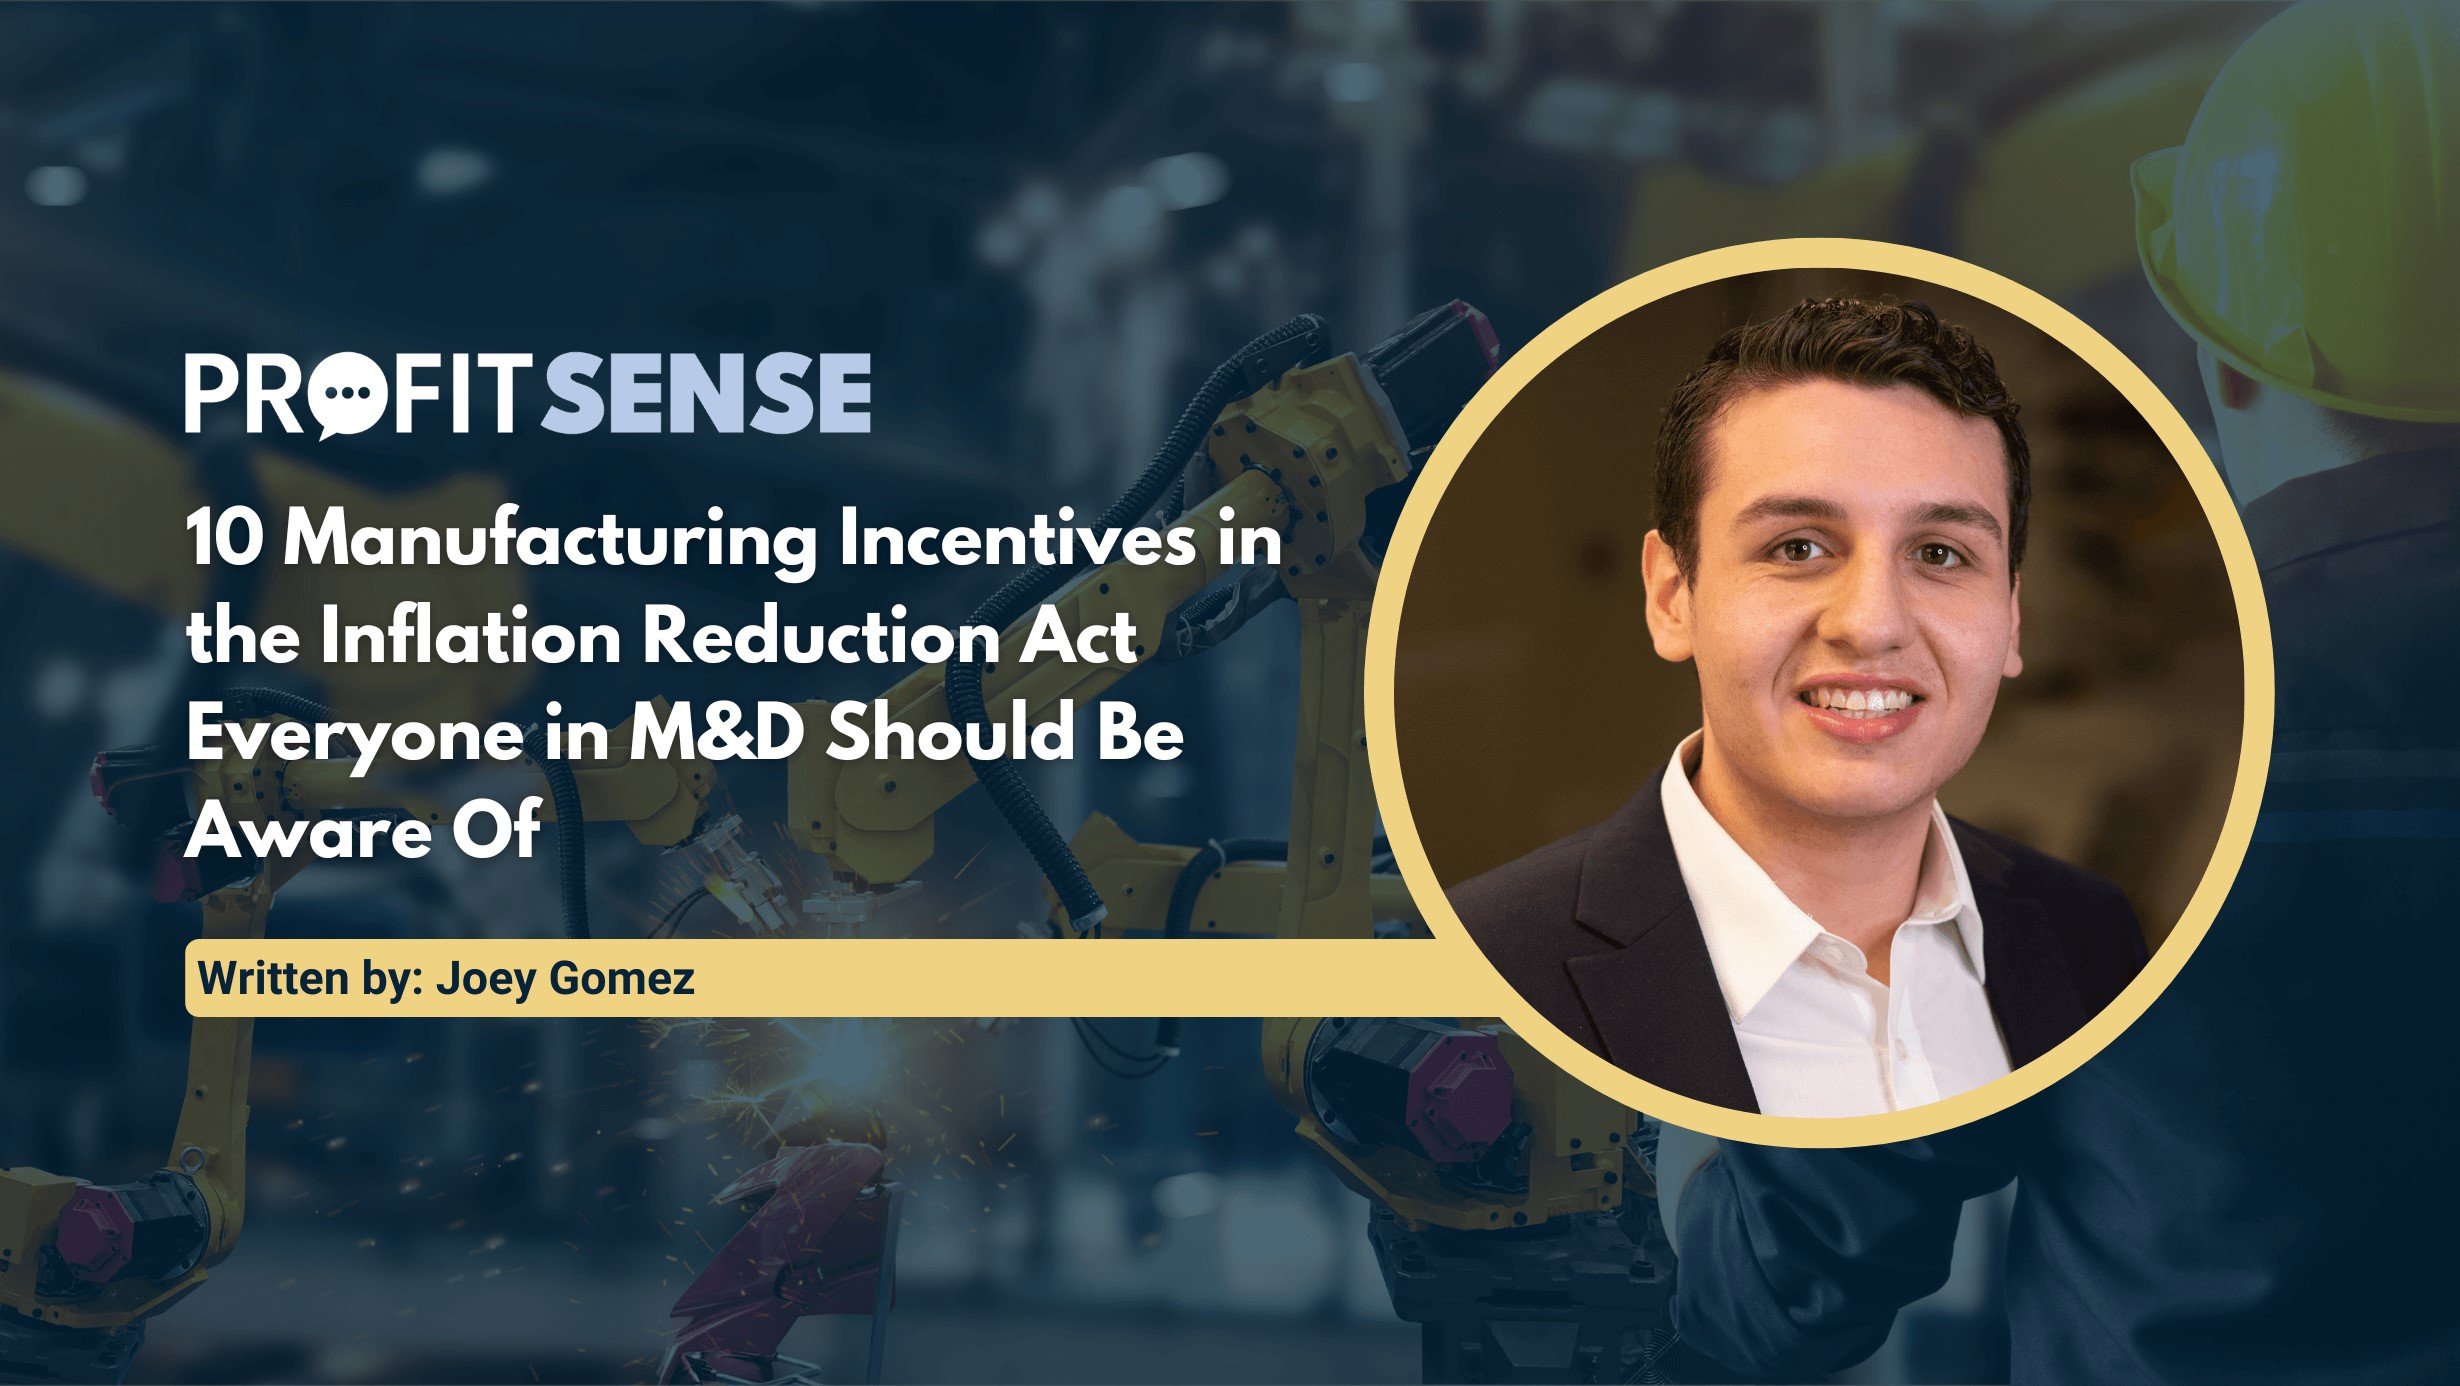 10 Manufacturing Incentives in the Inflation Reduction Act Everyone in M&D Should Know